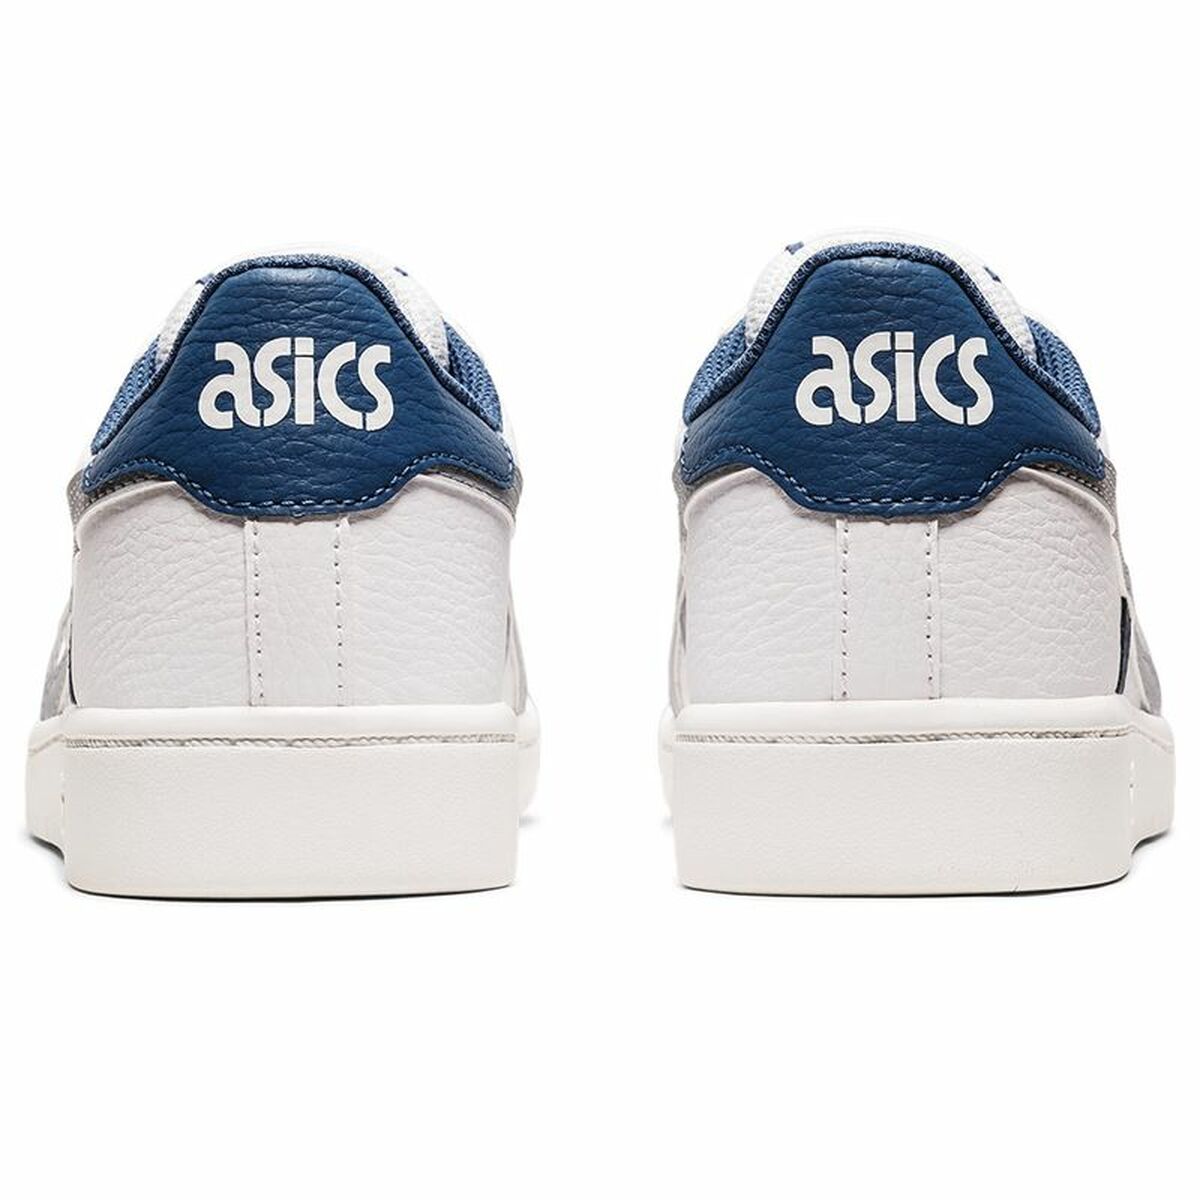 Sports Shoes for Kids Asics Japan S GS White